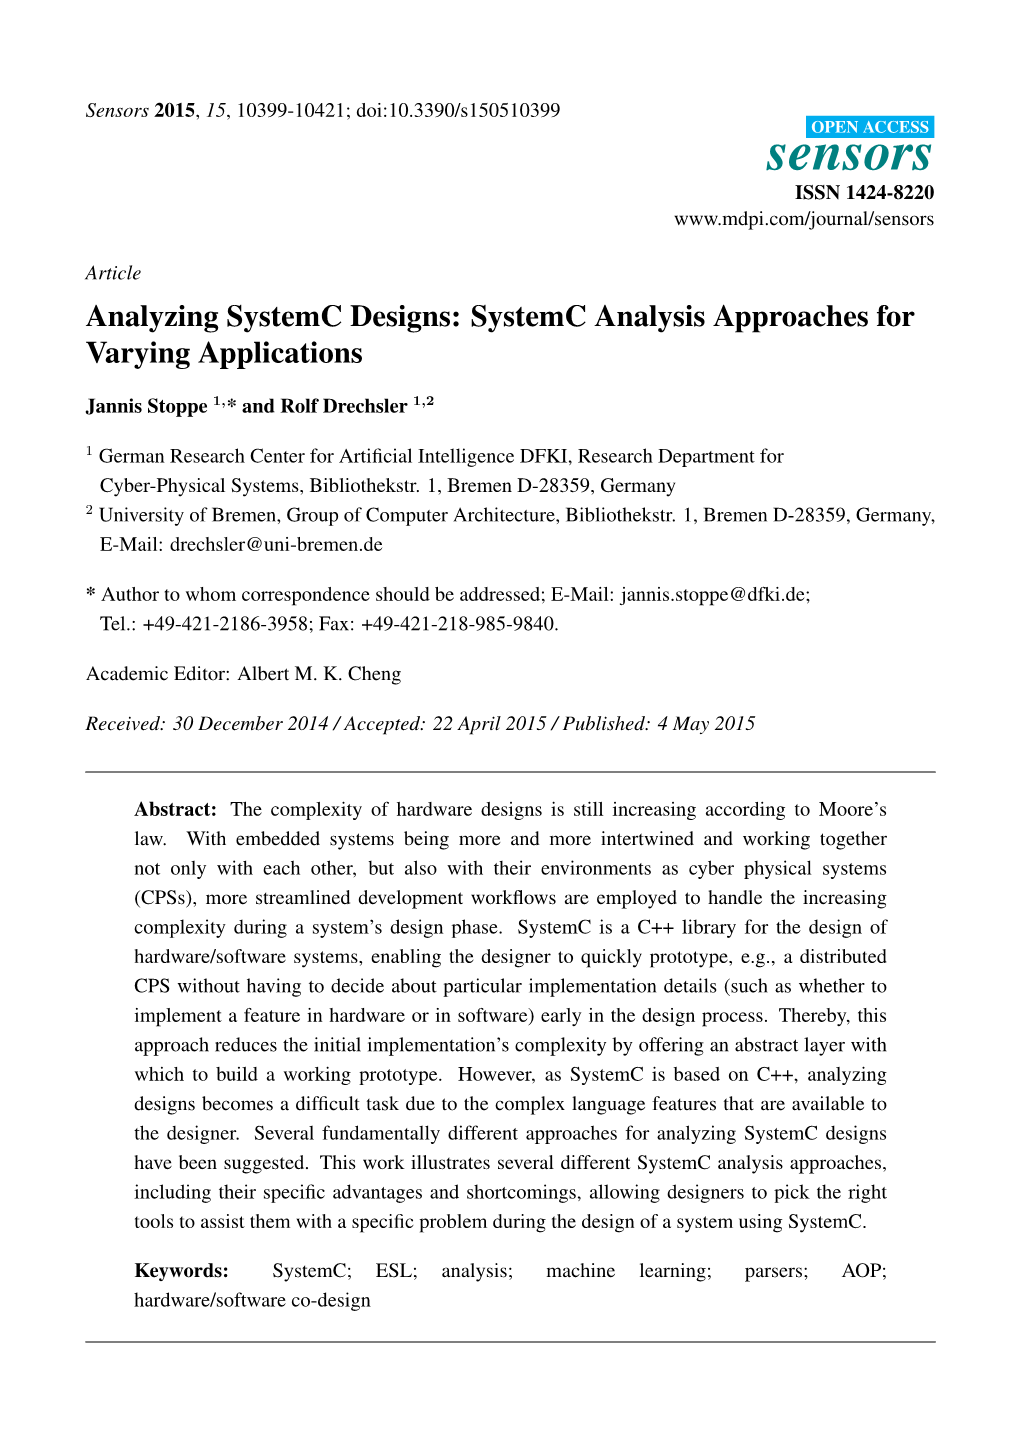 Analyzing Systemc Designs: Systemc Analysis Approaches for Varying Applications